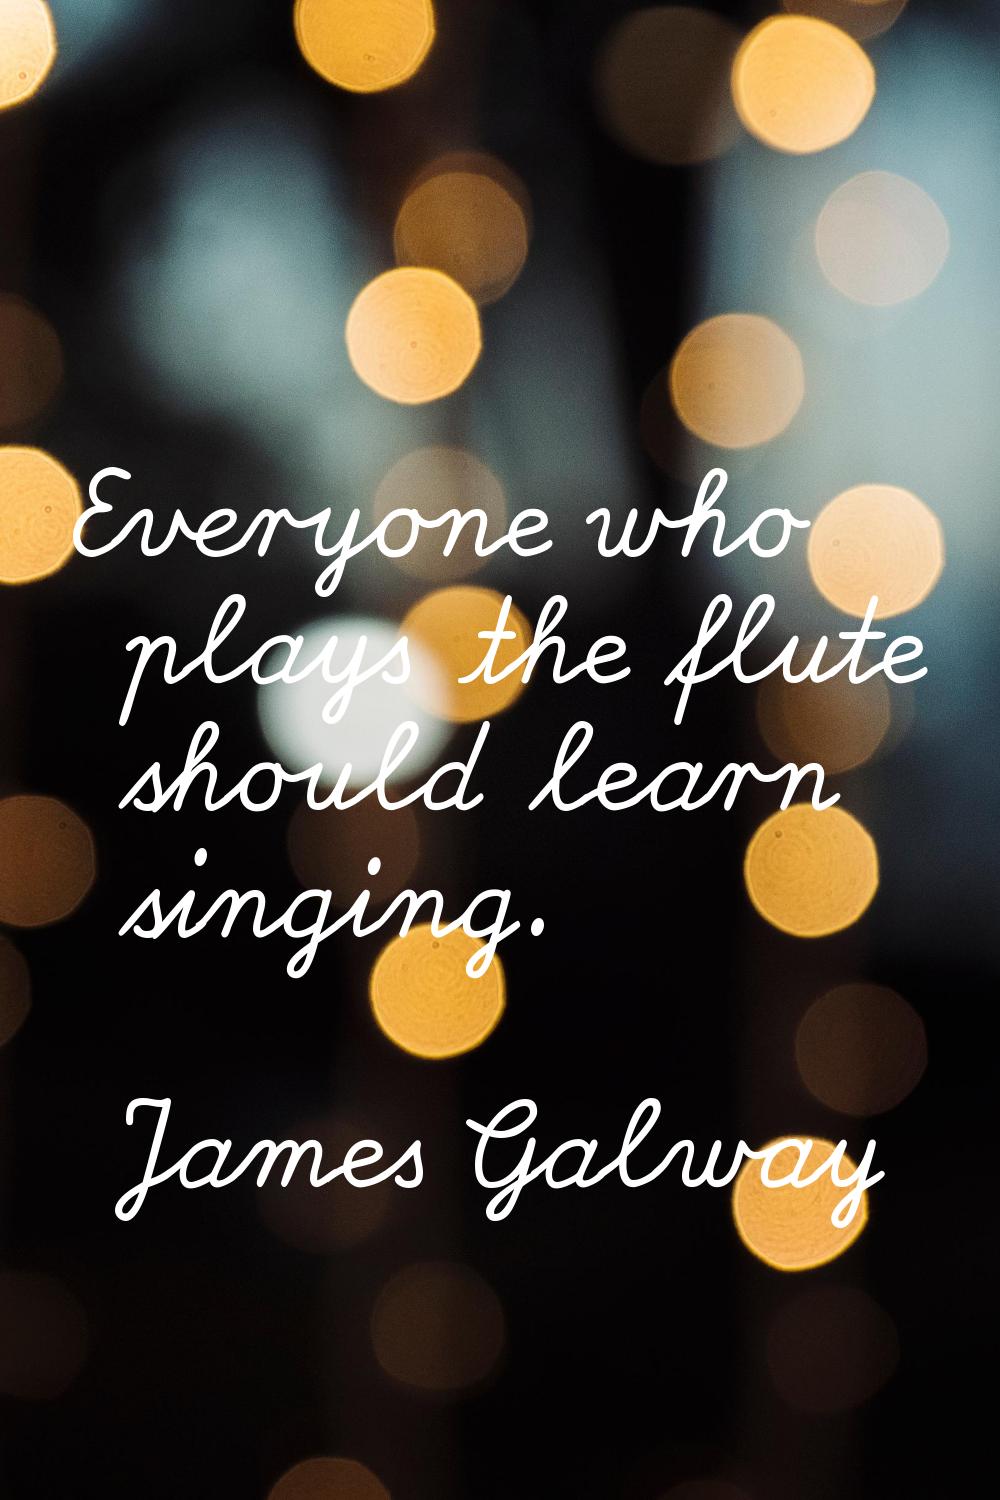 Everyone who plays the flute should learn singing.